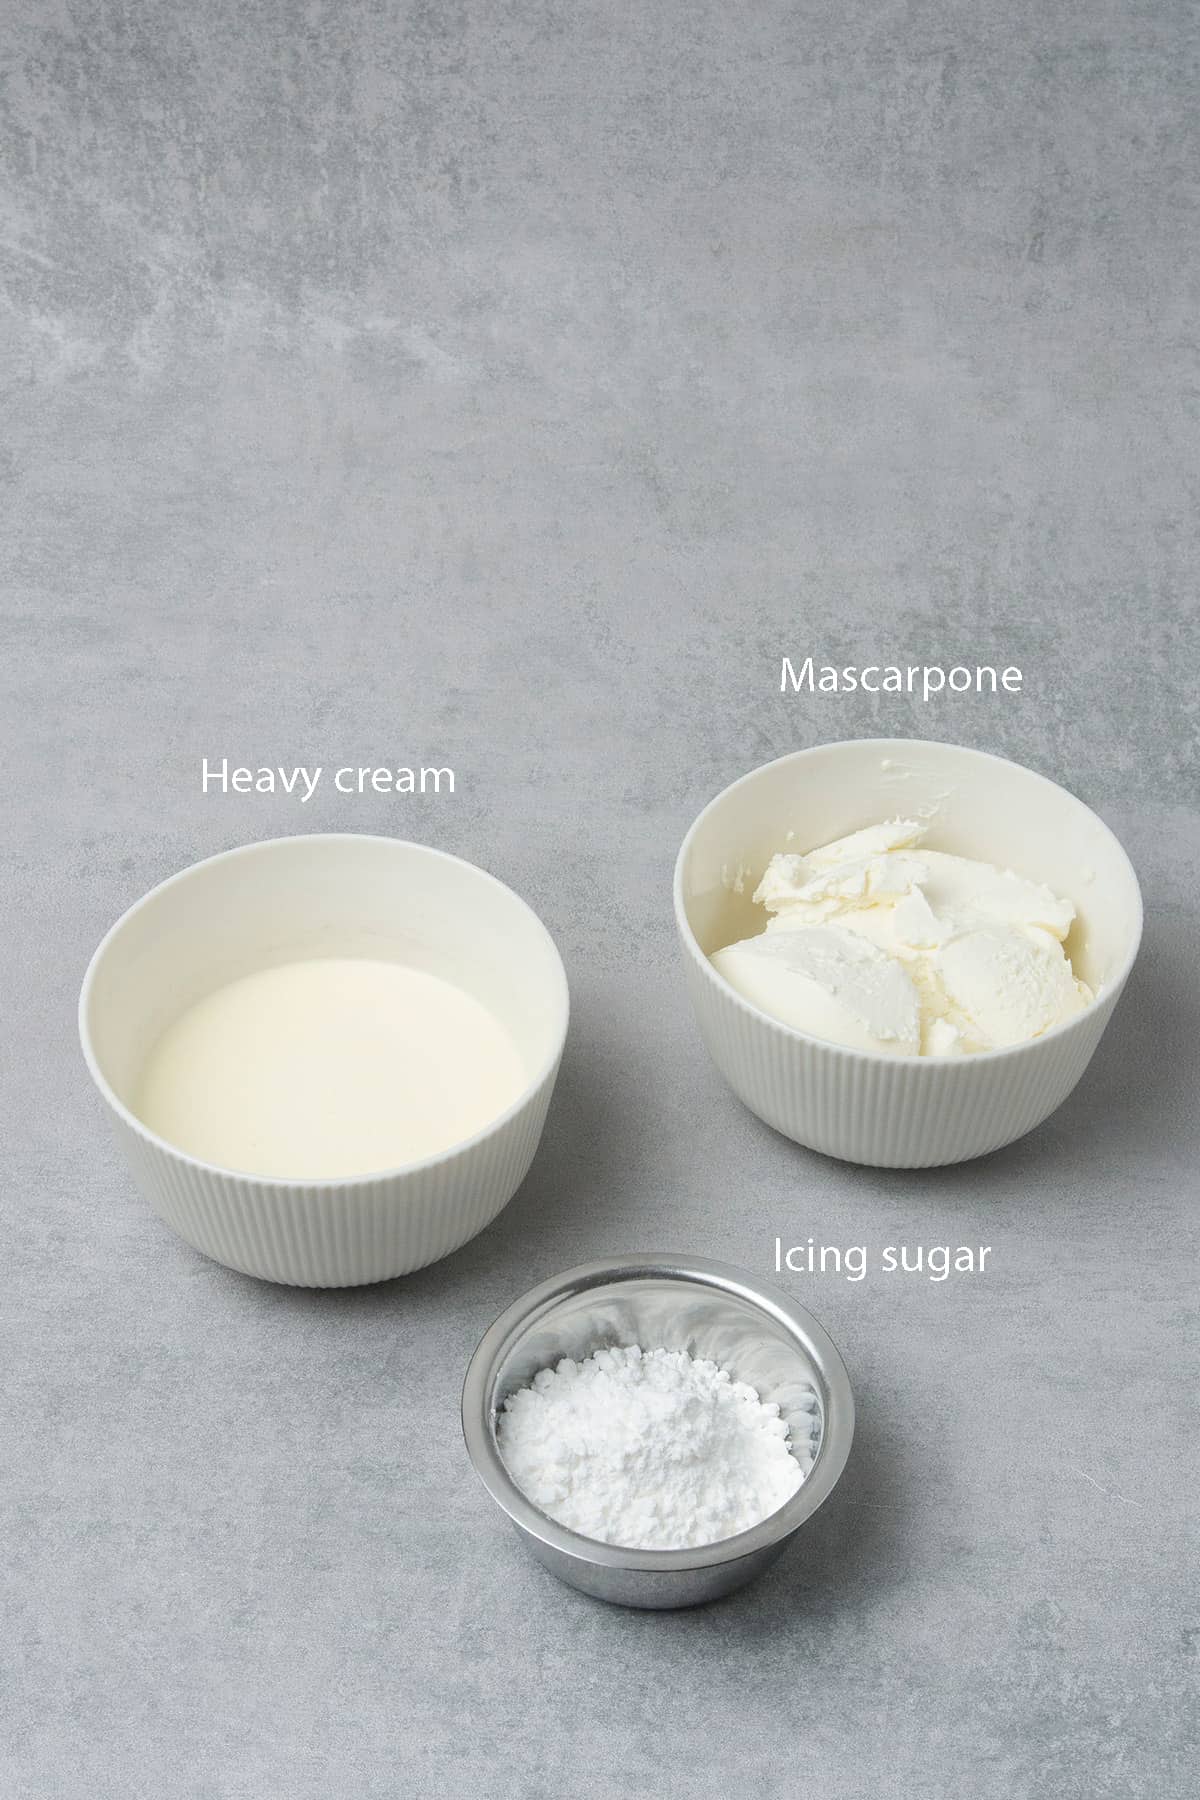 Ingredients for Whipped mascarpone frosting